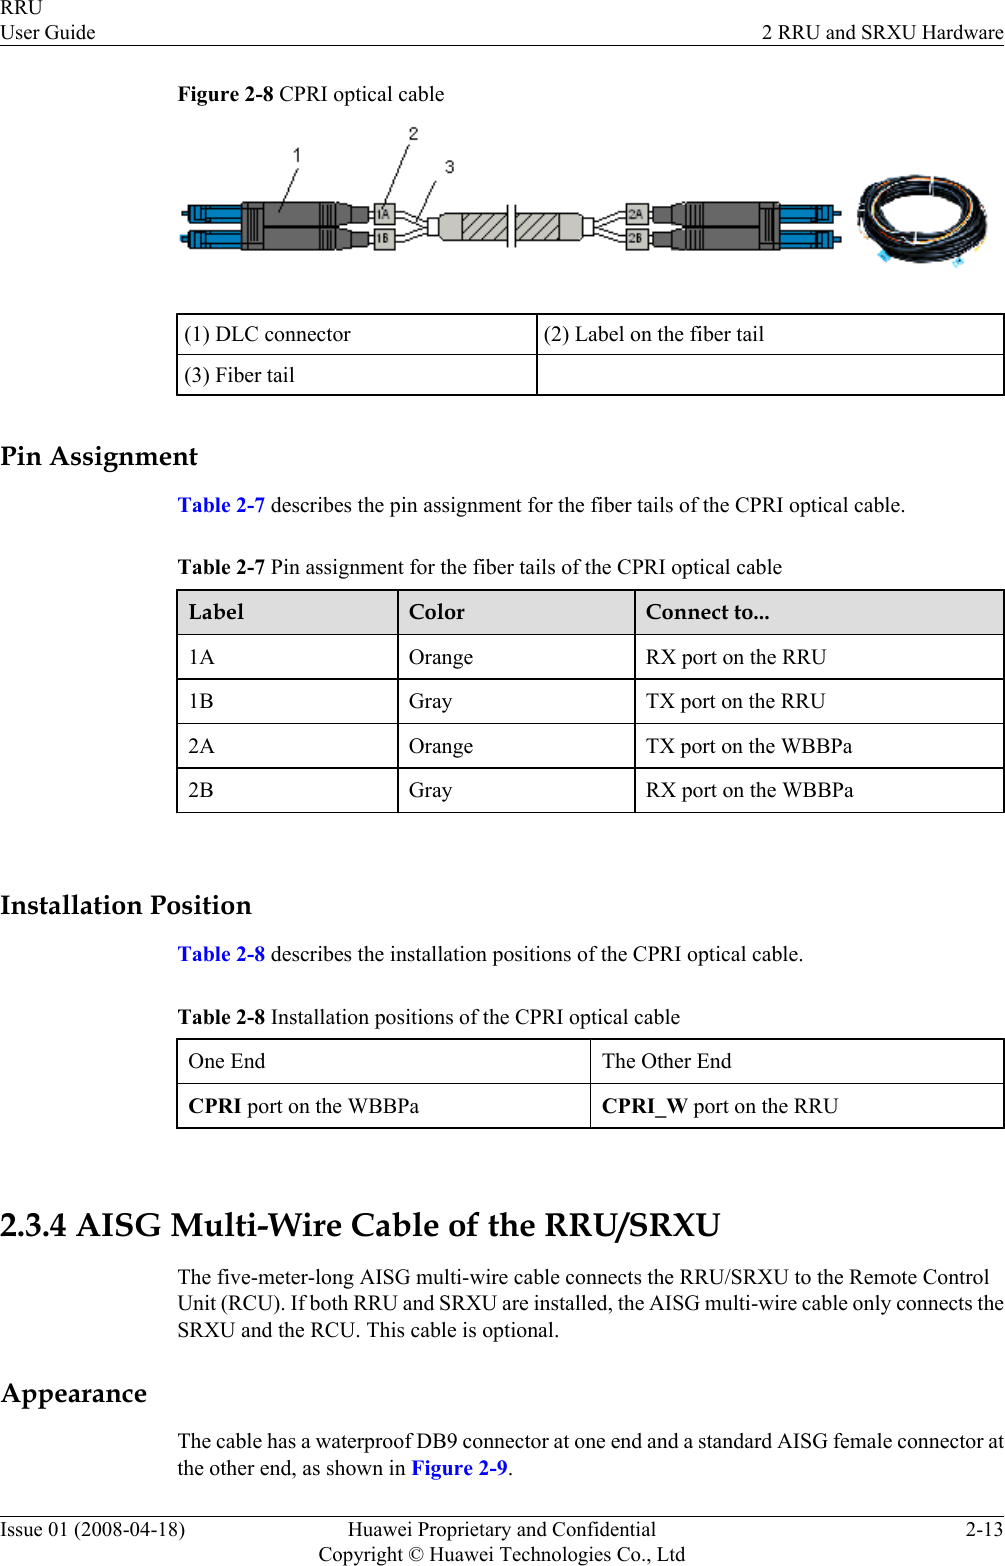 Figure 2-8 CPRI optical cable(1) DLC connector (2) Label on the fiber tail(3) Fiber tailPin AssignmentTable 2-7 describes the pin assignment for the fiber tails of the CPRI optical cable.Table 2-7 Pin assignment for the fiber tails of the CPRI optical cableLabel Color Connect to...1A Orange RX port on the RRU1B Gray TX port on the RRU2A Orange TX port on the WBBPa2B Gray RX port on the WBBPa Installation PositionTable 2-8 describes the installation positions of the CPRI optical cable.Table 2-8 Installation positions of the CPRI optical cableOne End The Other EndCPRI port on the WBBPa CPRI_W port on the RRU 2.3.4 AISG Multi-Wire Cable of the RRU/SRXUThe five-meter-long AISG multi-wire cable connects the RRU/SRXU to the Remote ControlUnit (RCU). If both RRU and SRXU are installed, the AISG multi-wire cable only connects theSRXU and the RCU. This cable is optional.AppearanceThe cable has a waterproof DB9 connector at one end and a standard AISG female connector atthe other end, as shown in Figure 2-9.RRUUser Guide 2 RRU and SRXU HardwareIssue 01 (2008-04-18) Huawei Proprietary and ConfidentialCopyright © Huawei Technologies Co., Ltd2-13